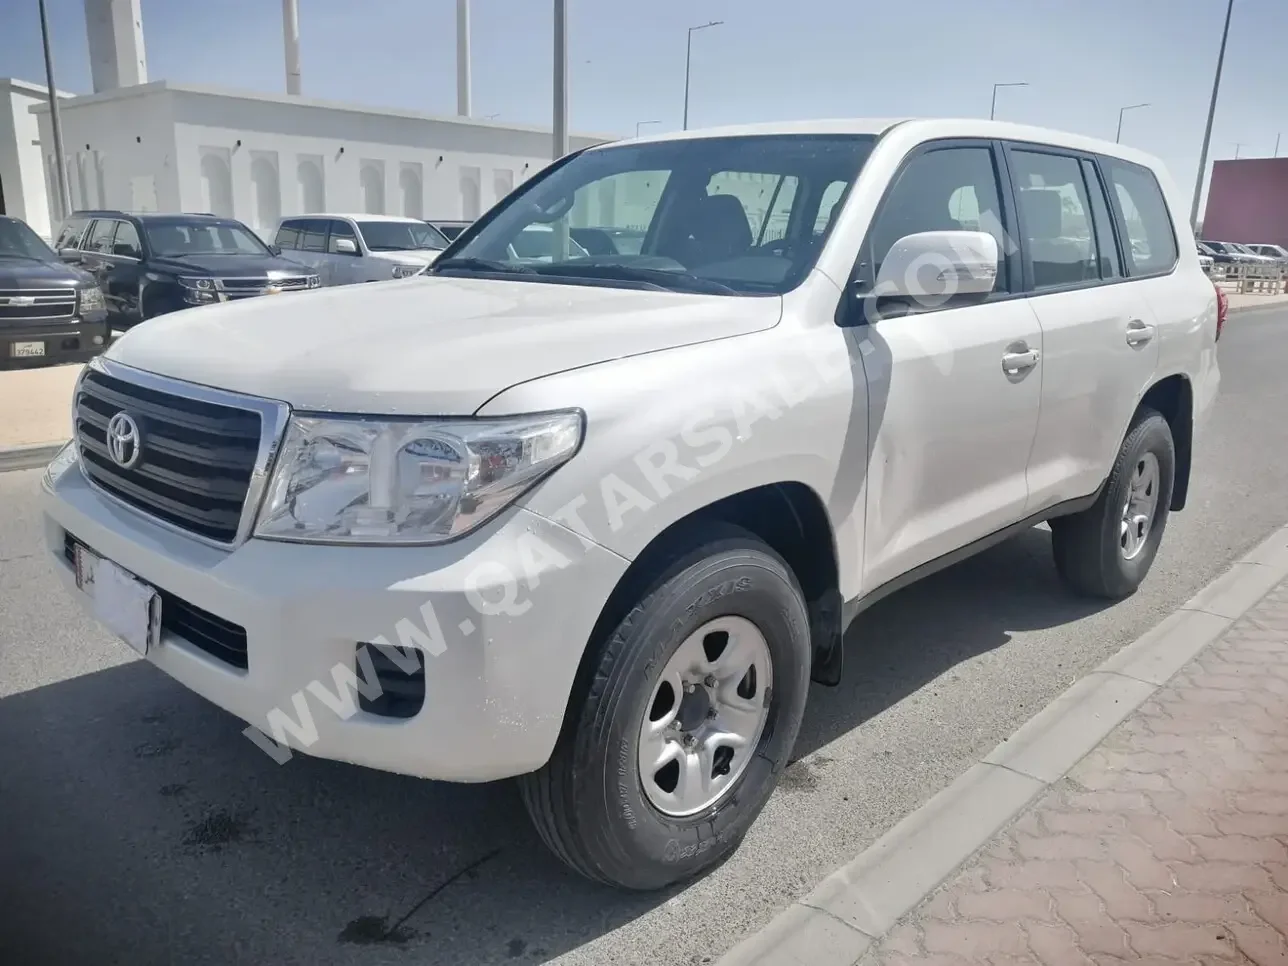 Toyota  Land Cruiser  G  2012  Automatic  38,000 Km  6 Cylinder  Four Wheel Drive (4WD)  SUV  White